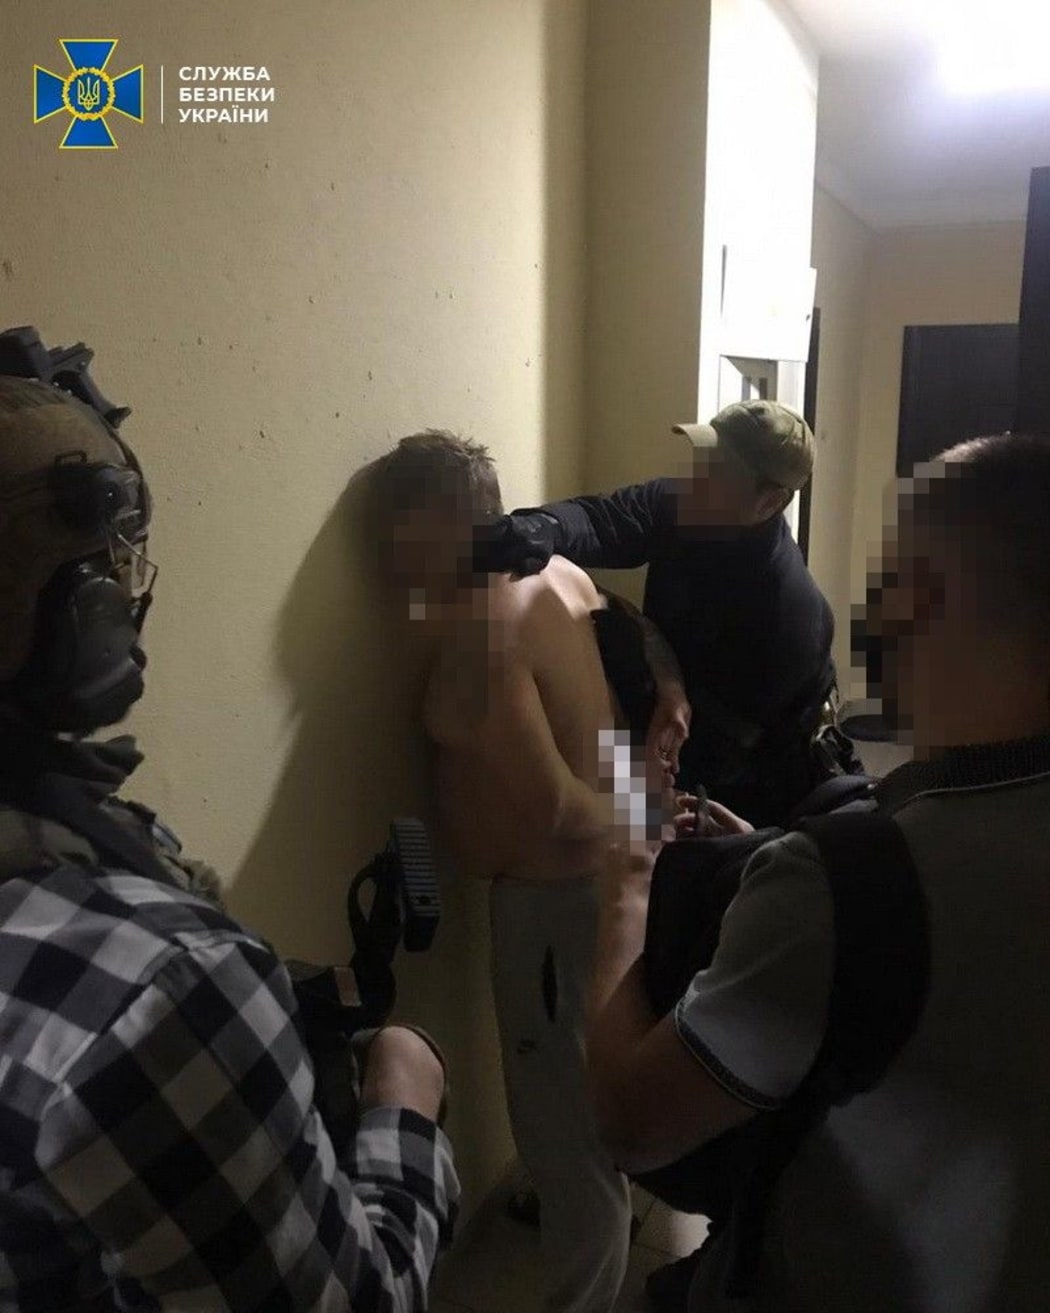 A man is arrested by the Ukranian secret service after raids on neo-Nazis in the area who were reportedly inspired by the Christchurch mosque attacker.